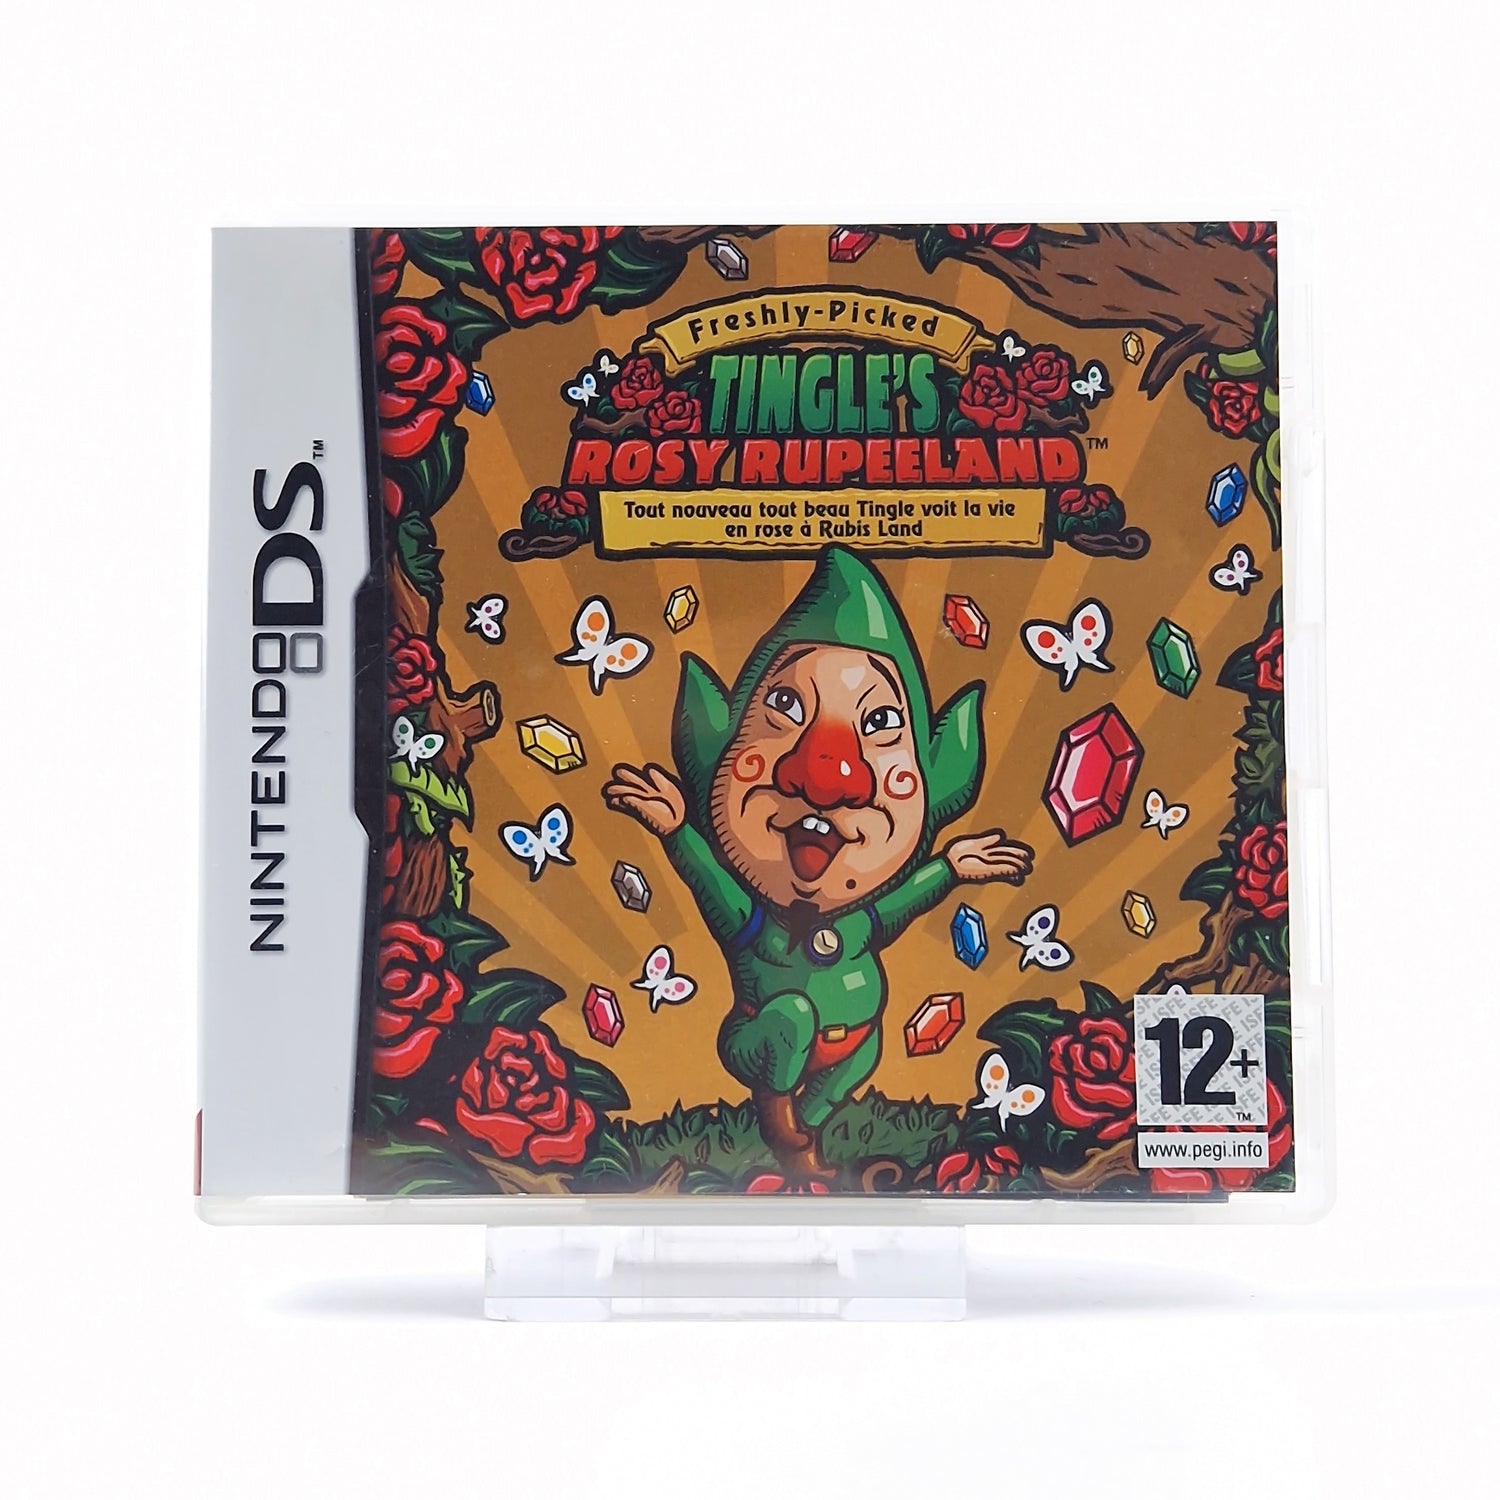 Nintendo DS Spiel : Tingle´s Rosy Rupeeland - OVP Anleitung PAL Game | 3DS